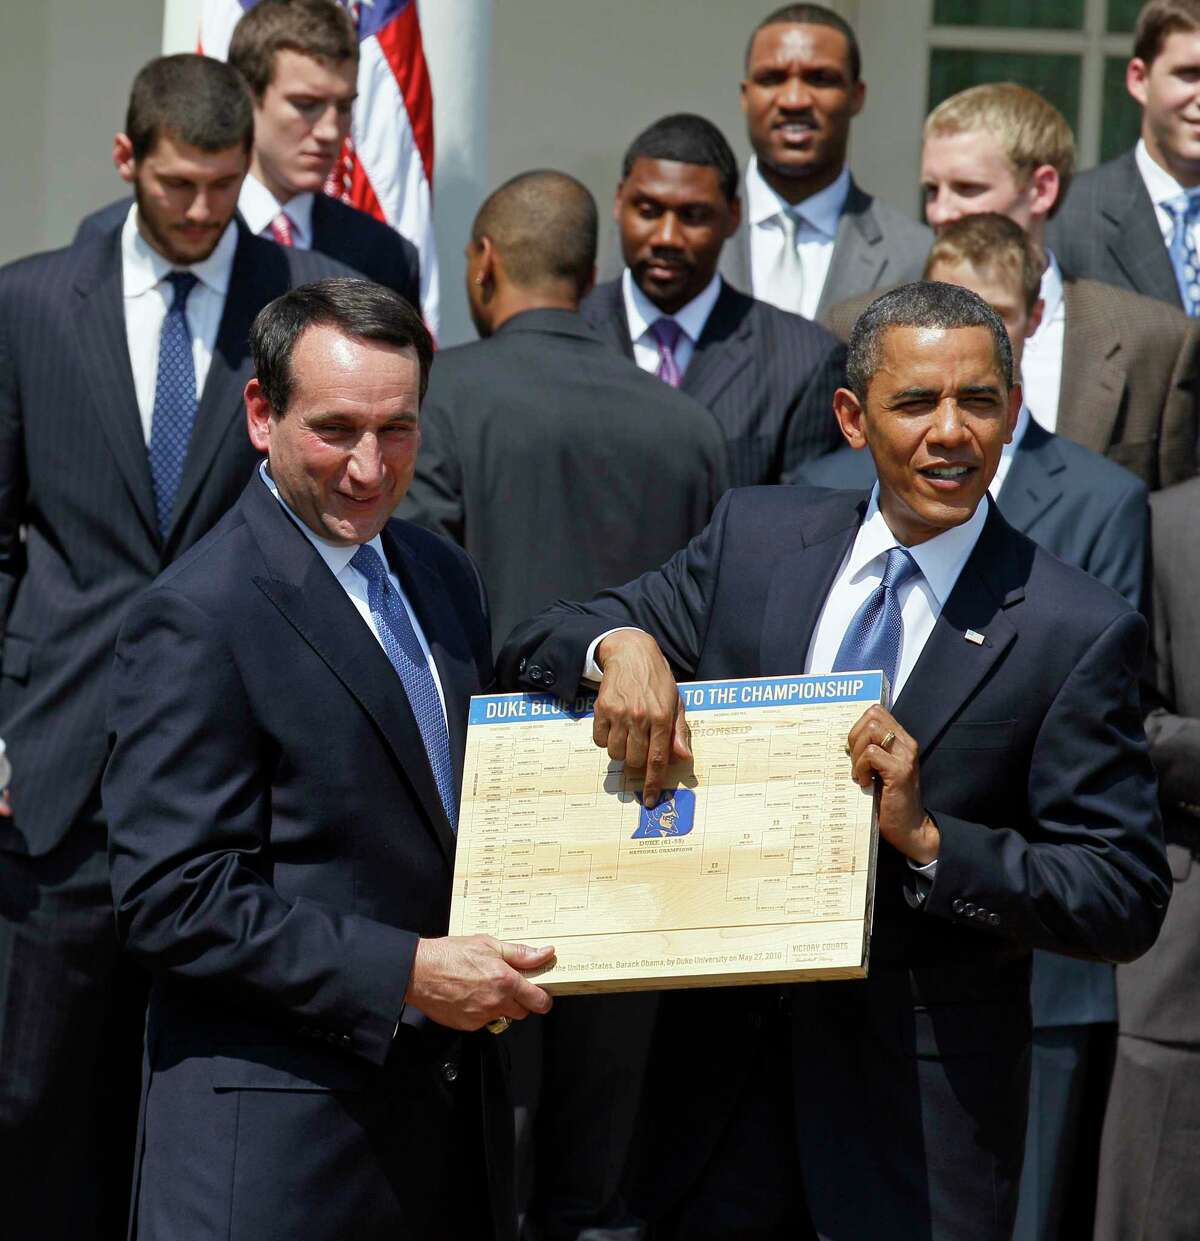 FILE - In this May 27, 2010 file photo, President Barack Obama looks over the bracket with Duke University basketball Coach Mike Krzyzewski in the Rose Garden of the White House in Washington, where he honored the team. From his campaign fist bump to his theatrical mic drop at the last White House correspondents’ dinner, Barack Obama ruled as America’s pop culture president. His two terms played out like a running chronicle of the trends of our times: slow-jamming the news with Jimmy Fallon, reading mean tweets with Jimmy Kimmel, filling out his NCAA basketball bracket on ESPN, cruising with Jerry Seinfeld on “Comedians in Cars Getting Coffee.” (AP Photo/Alex Brandon, File)